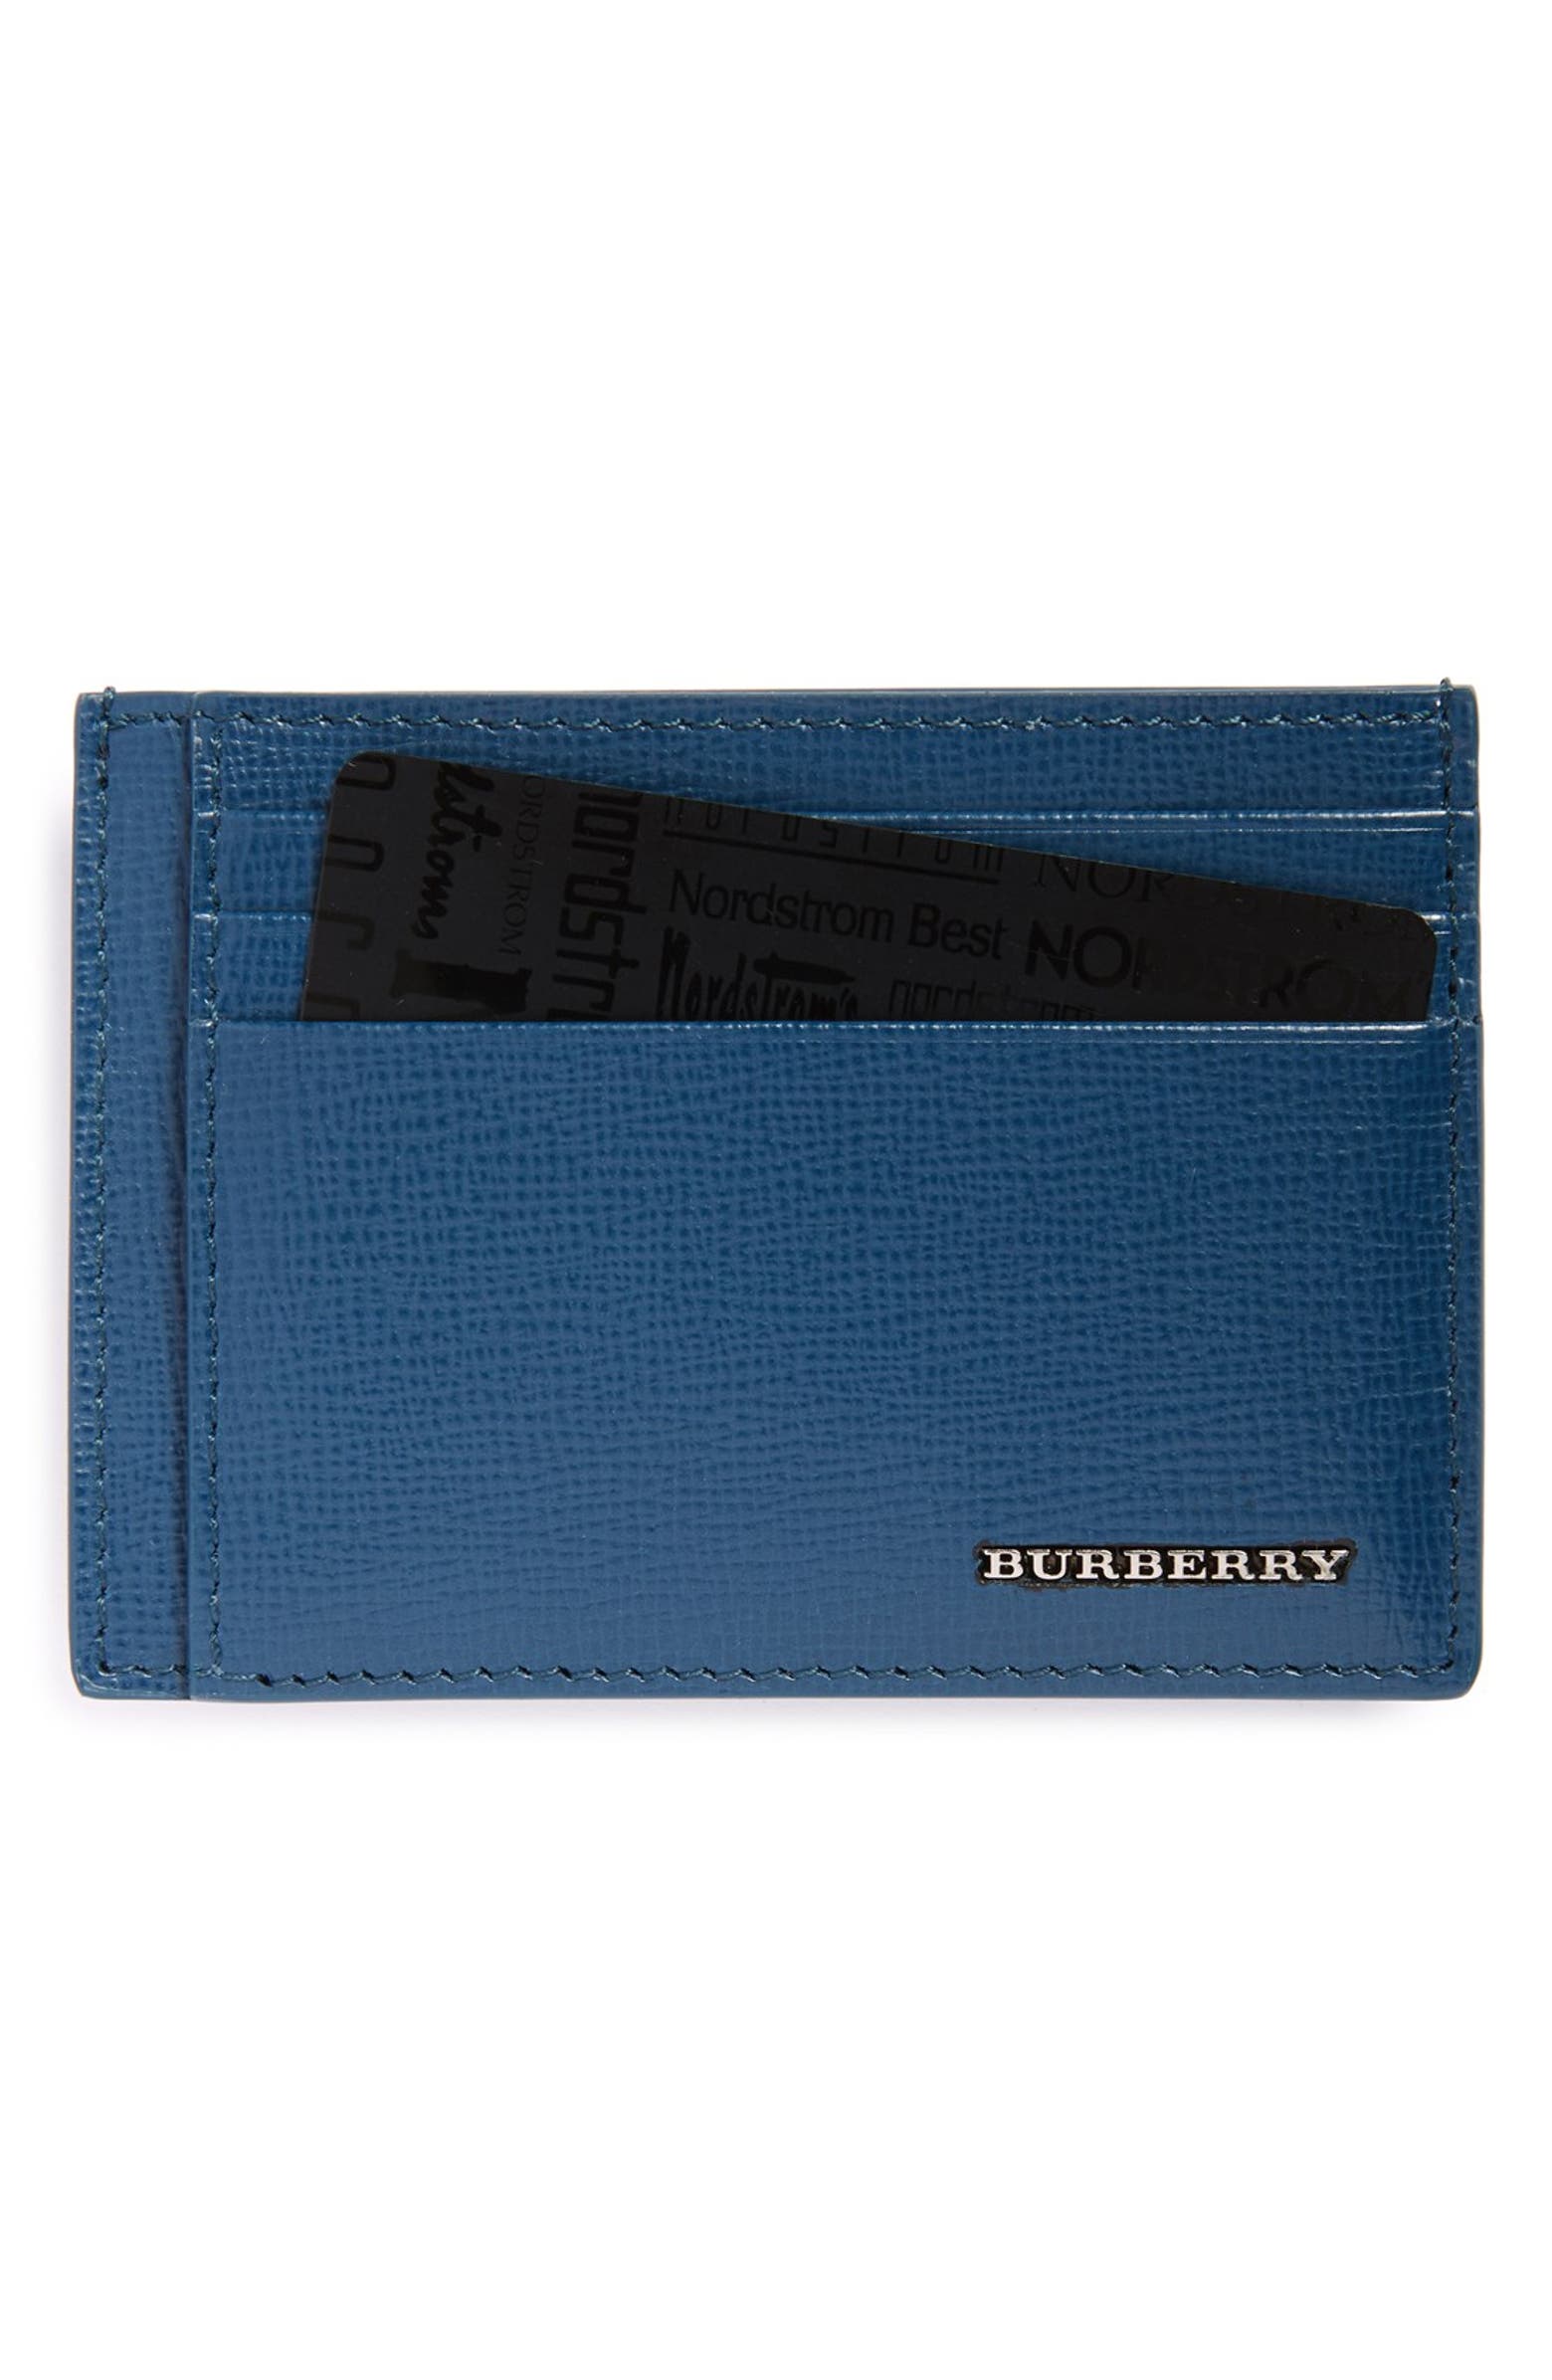 Burberry 'Bernie' Leather Card Case | Nordstrom